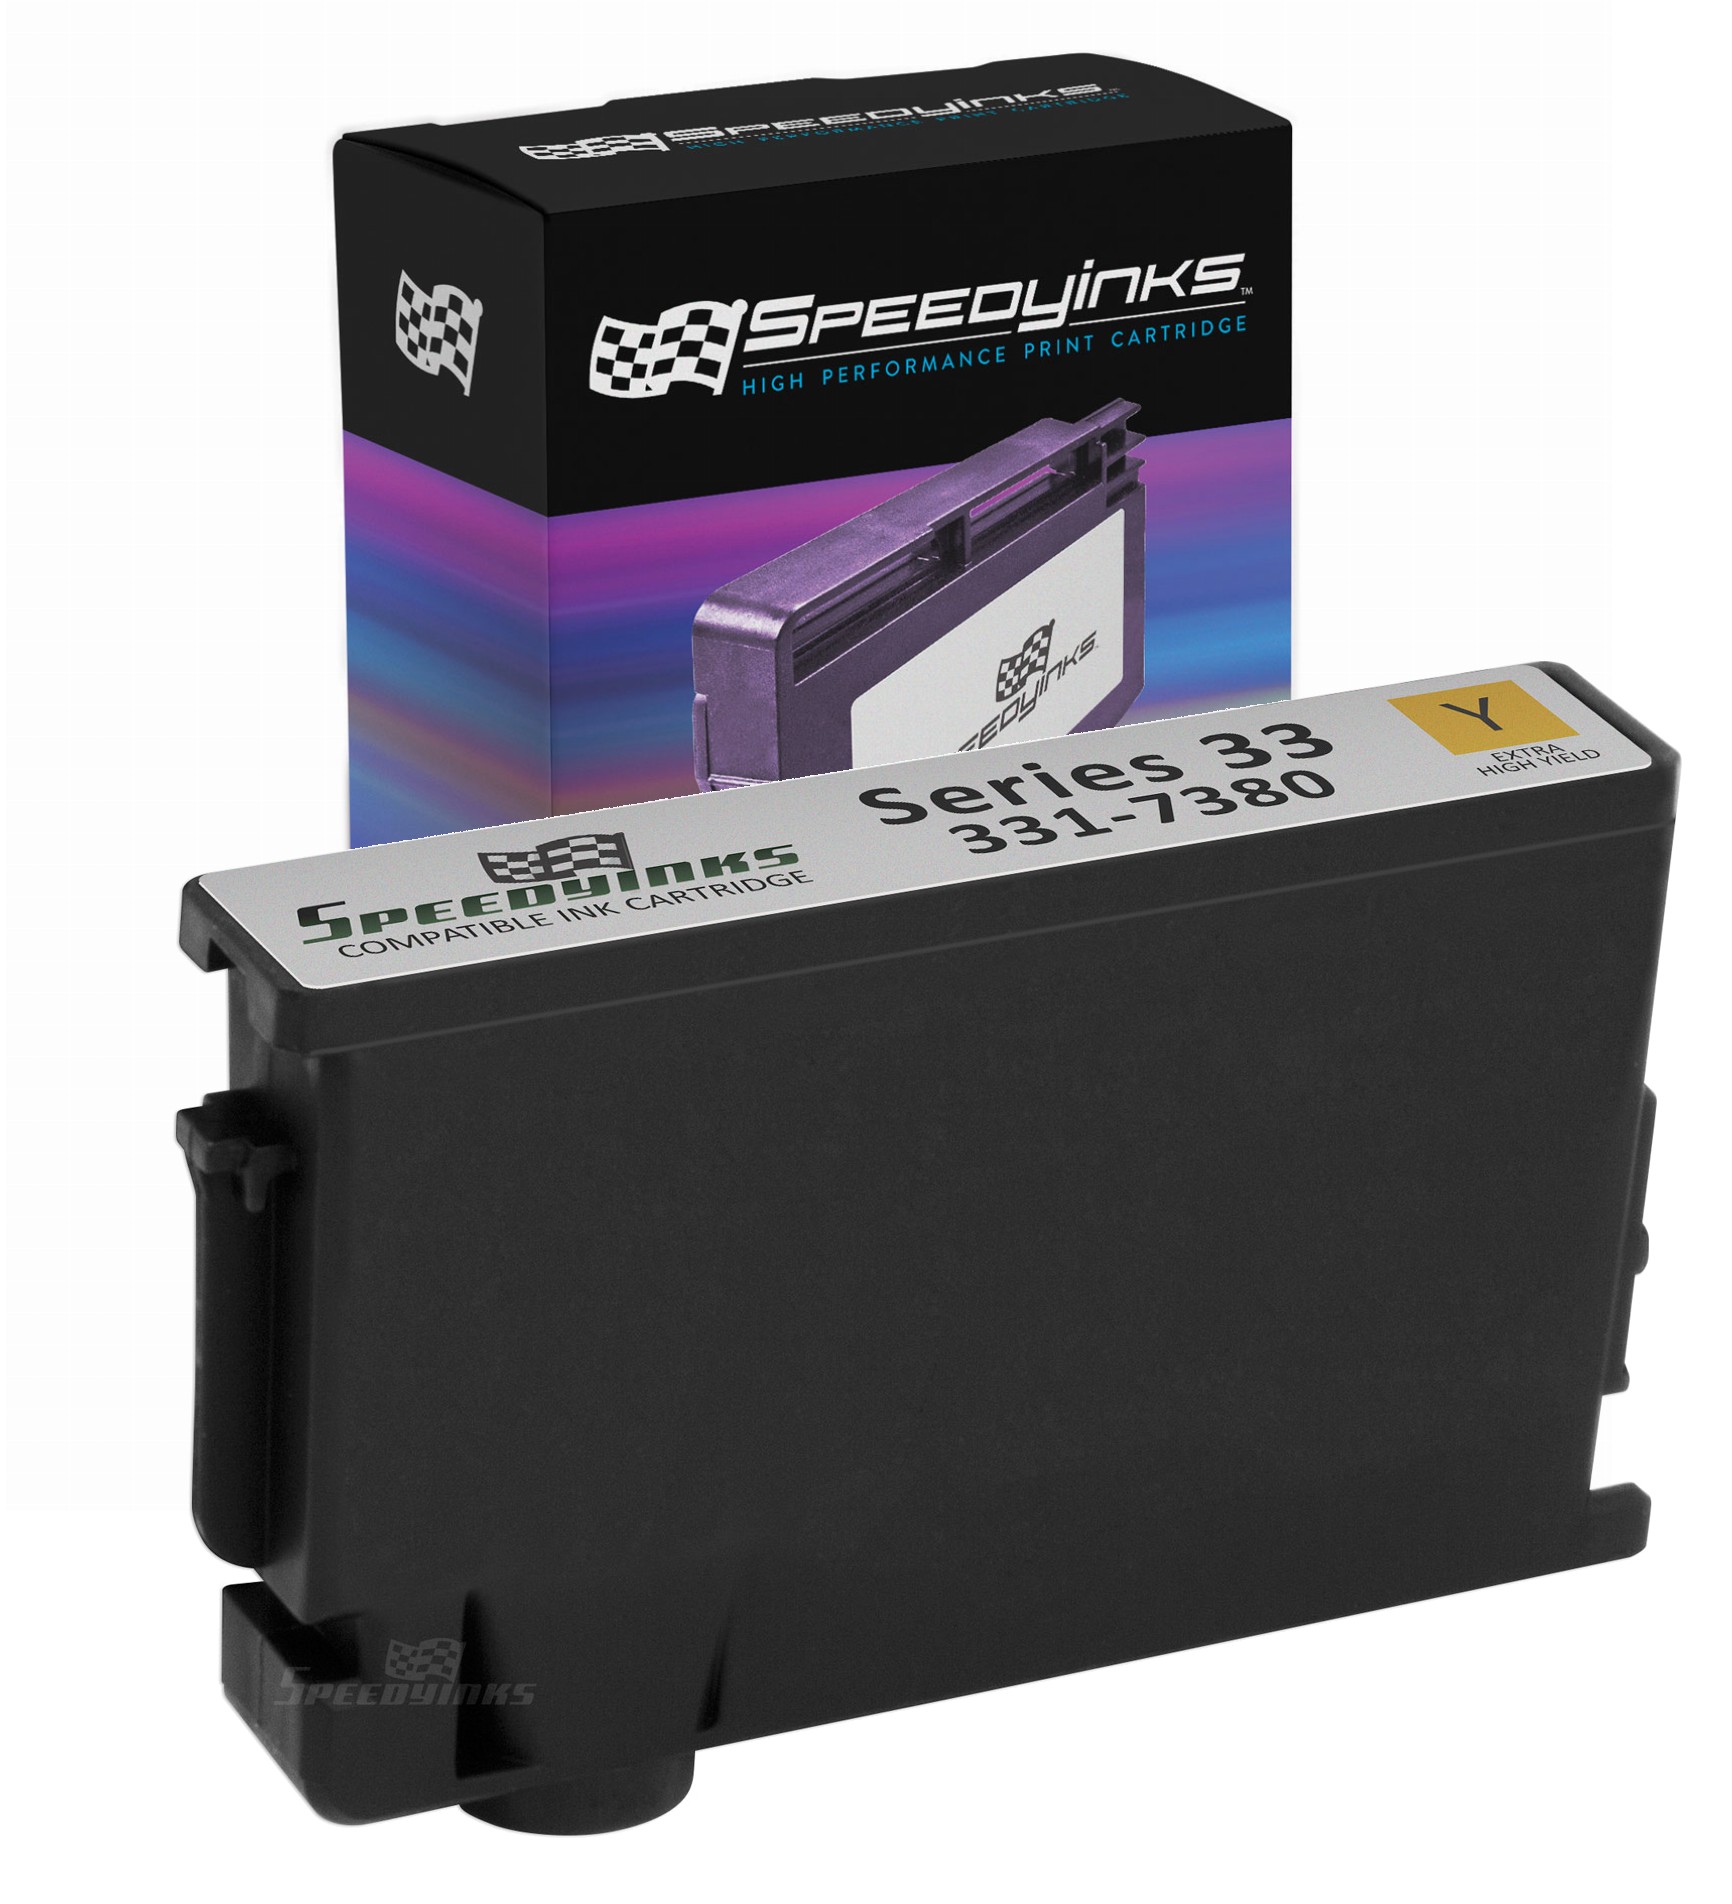 Speedy Compatible Toner Cartridge Replacement for Dell 331-7380 | GRW63 Series 33 Extra High-Yield (Yellow) - image 1 of 6